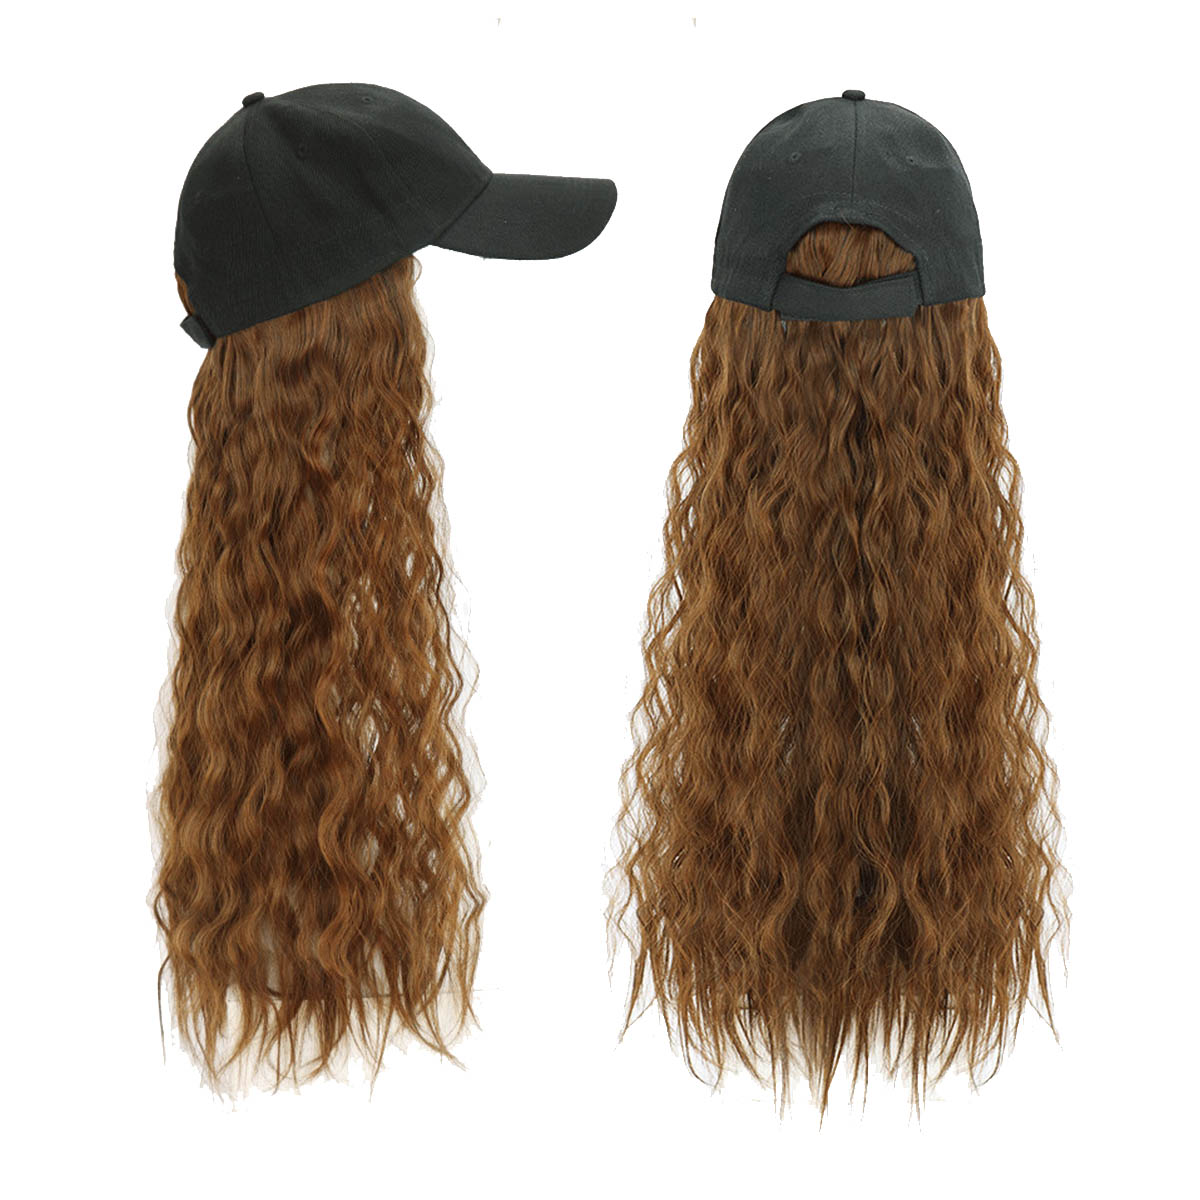 Woman-Girl-Cap-Wig-Hat-Light-Long-Wavy-Halloween-Party-Curly--Club-Winter-1619885-4